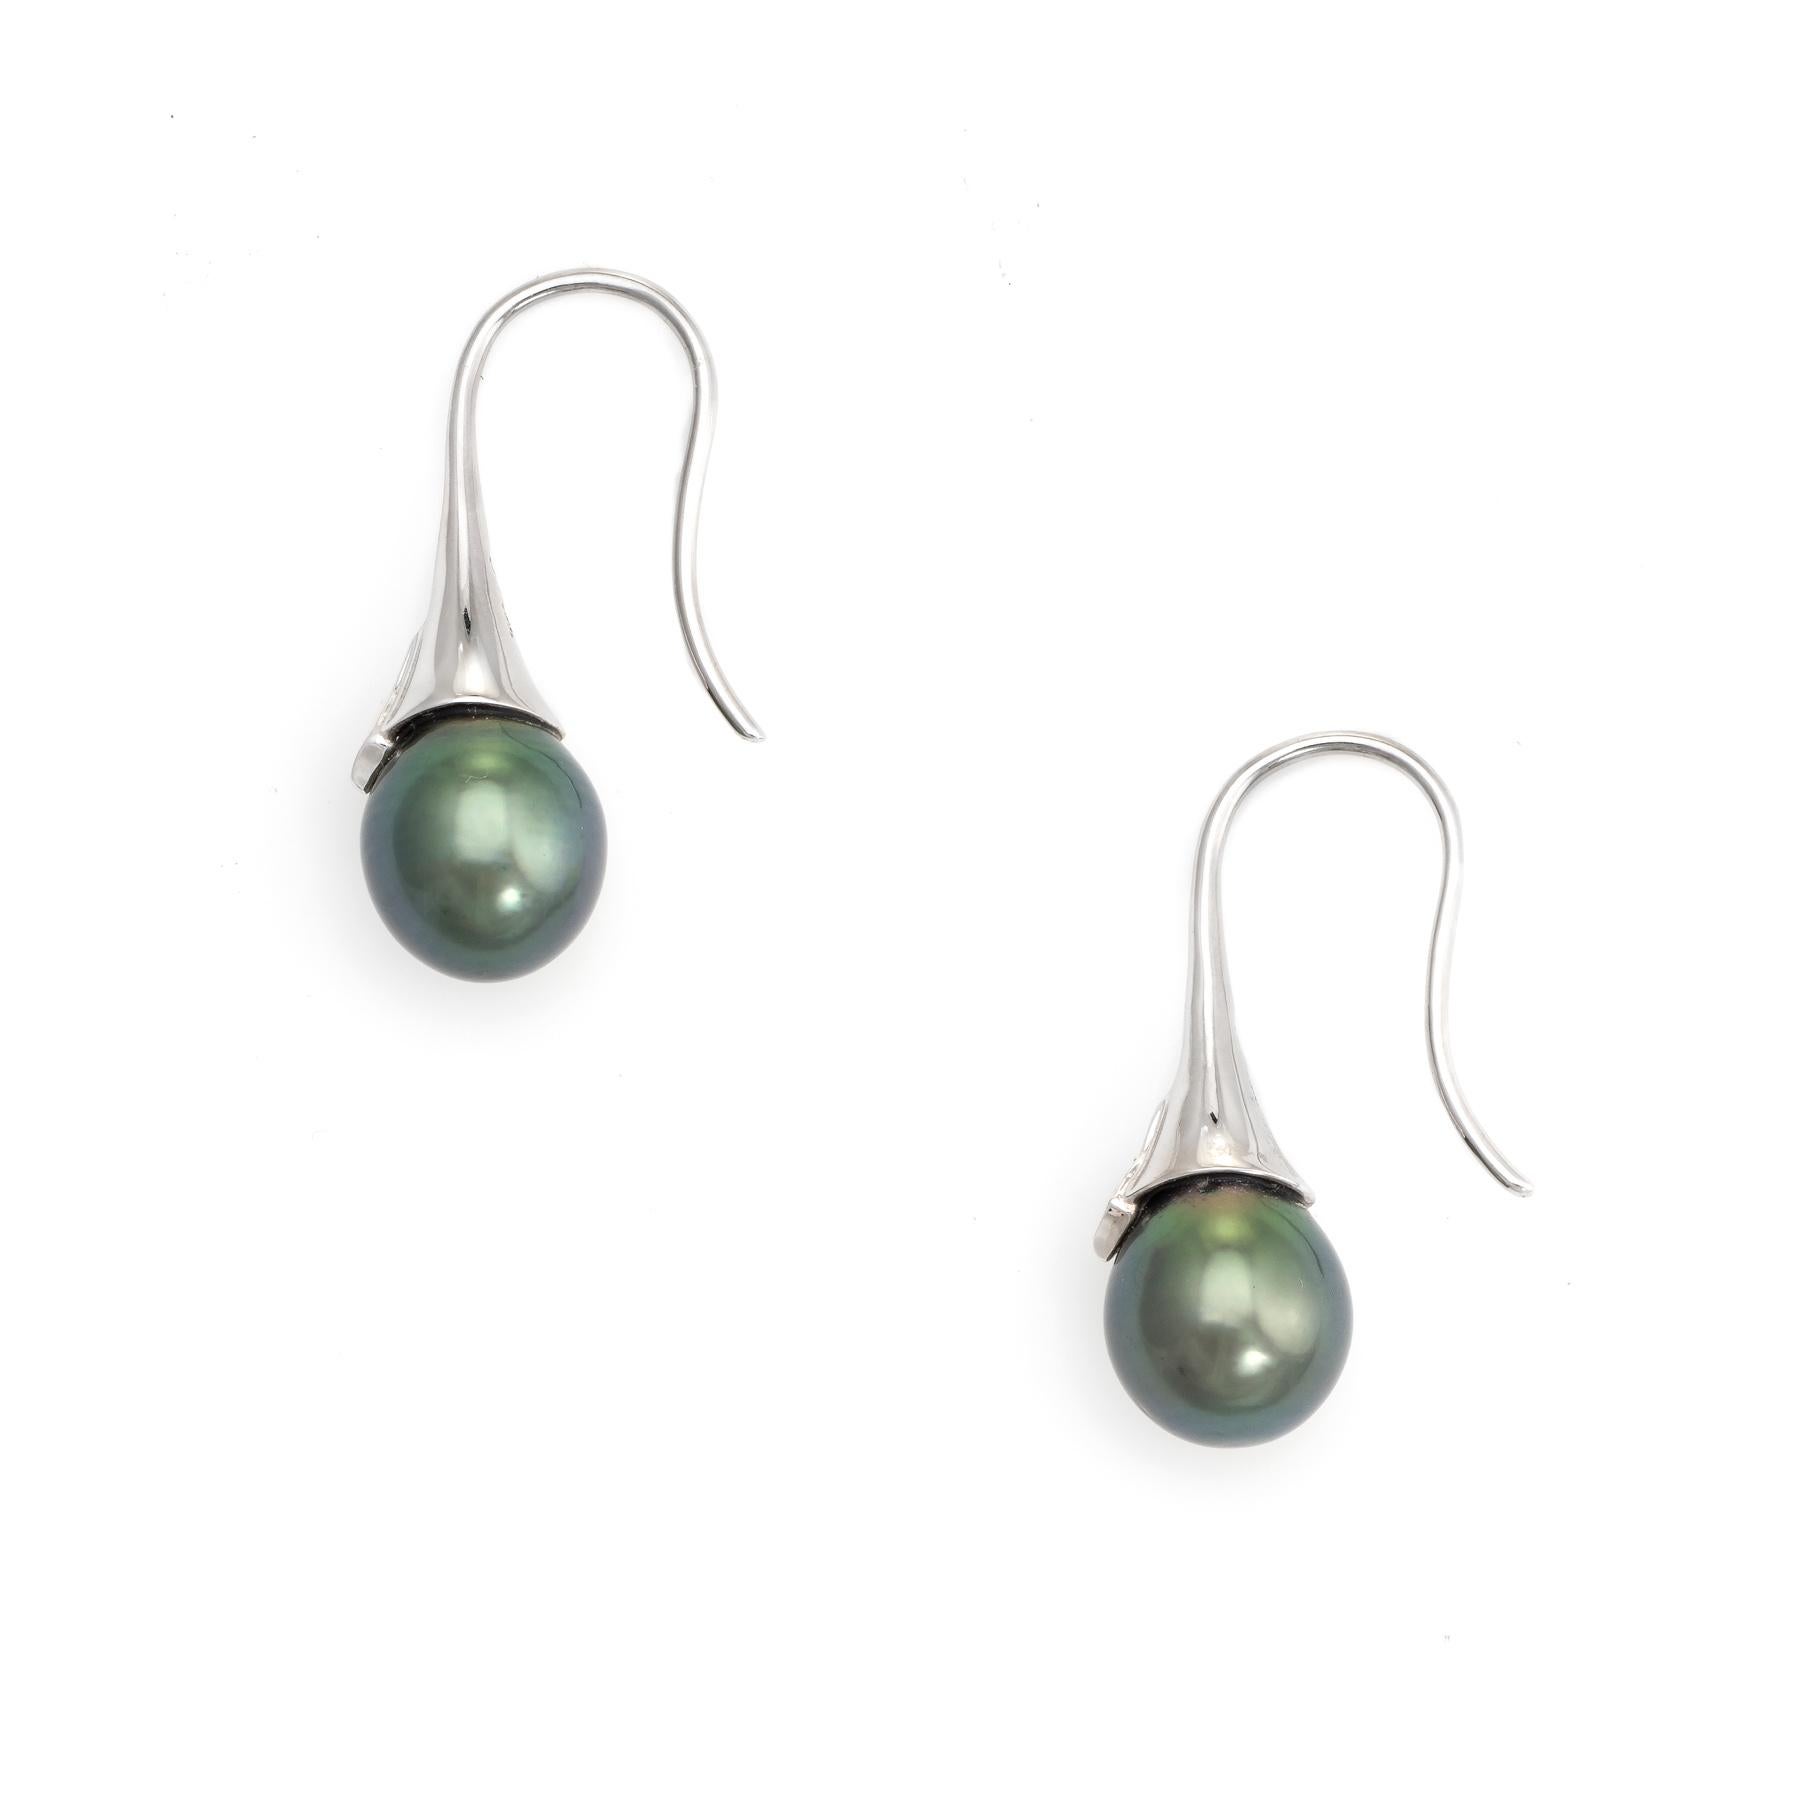 Elegant pair of freshwater black pearl & diamond earrings crafted in 18k white gold. 

Freshwater black pearls each measure 9.5mm, accented with an estimated 0.02 carats of diamonds (estimated at I color and I1 clarity).

The stylish earrings are